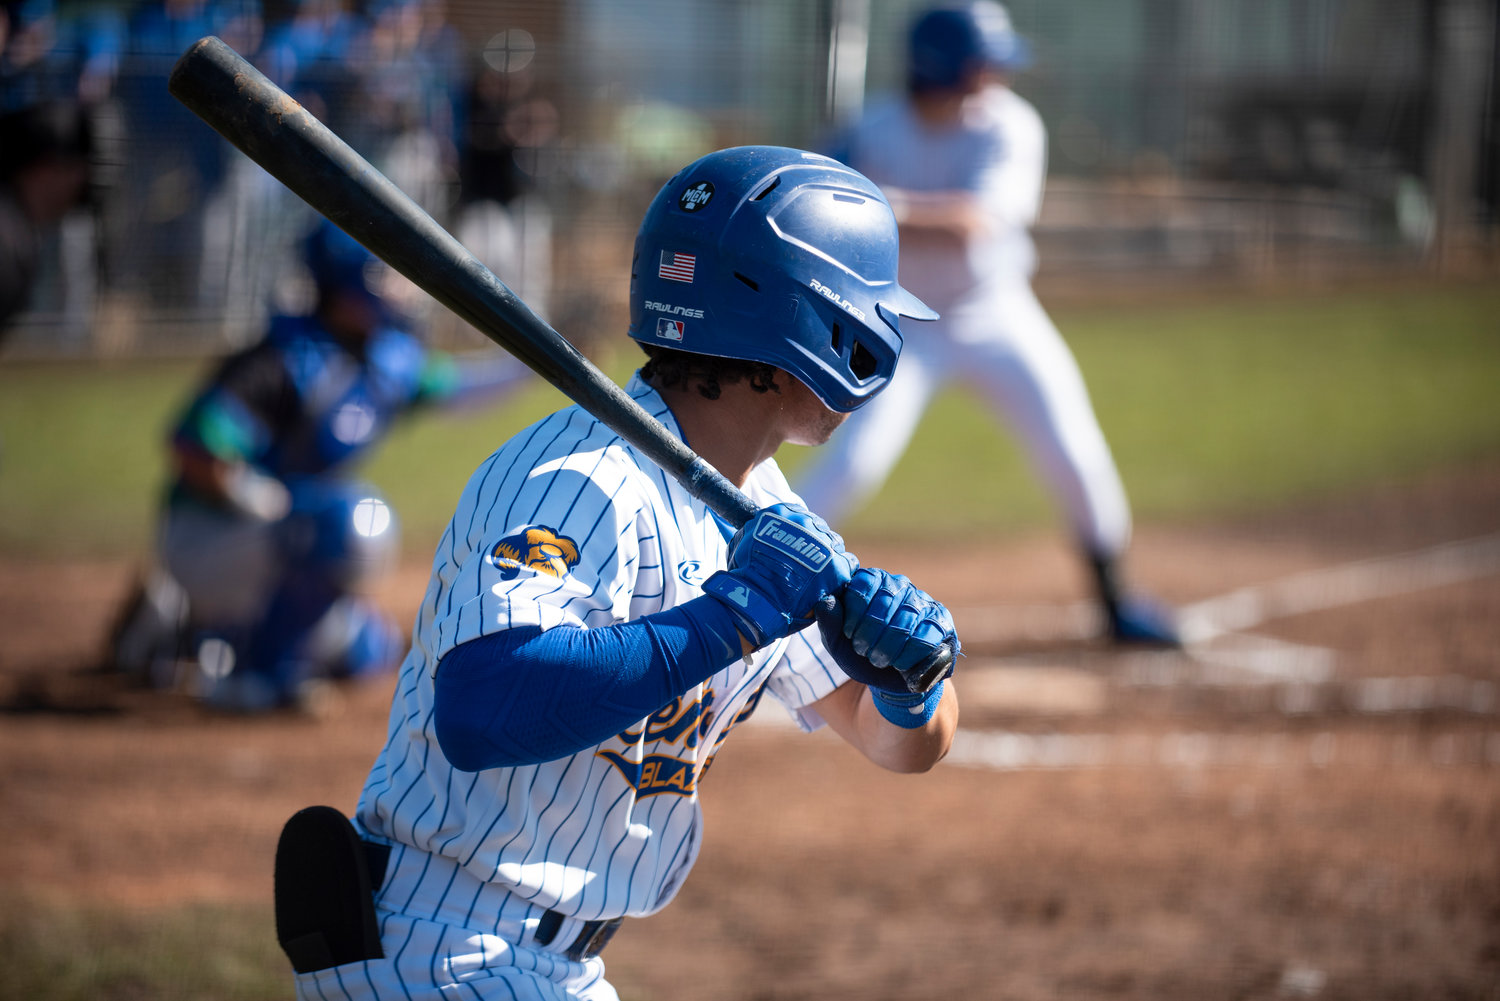 A Centralia College batter waits in the on-deck circle during a home game against Edmonds on Feb. 25 at Wheeler Field.